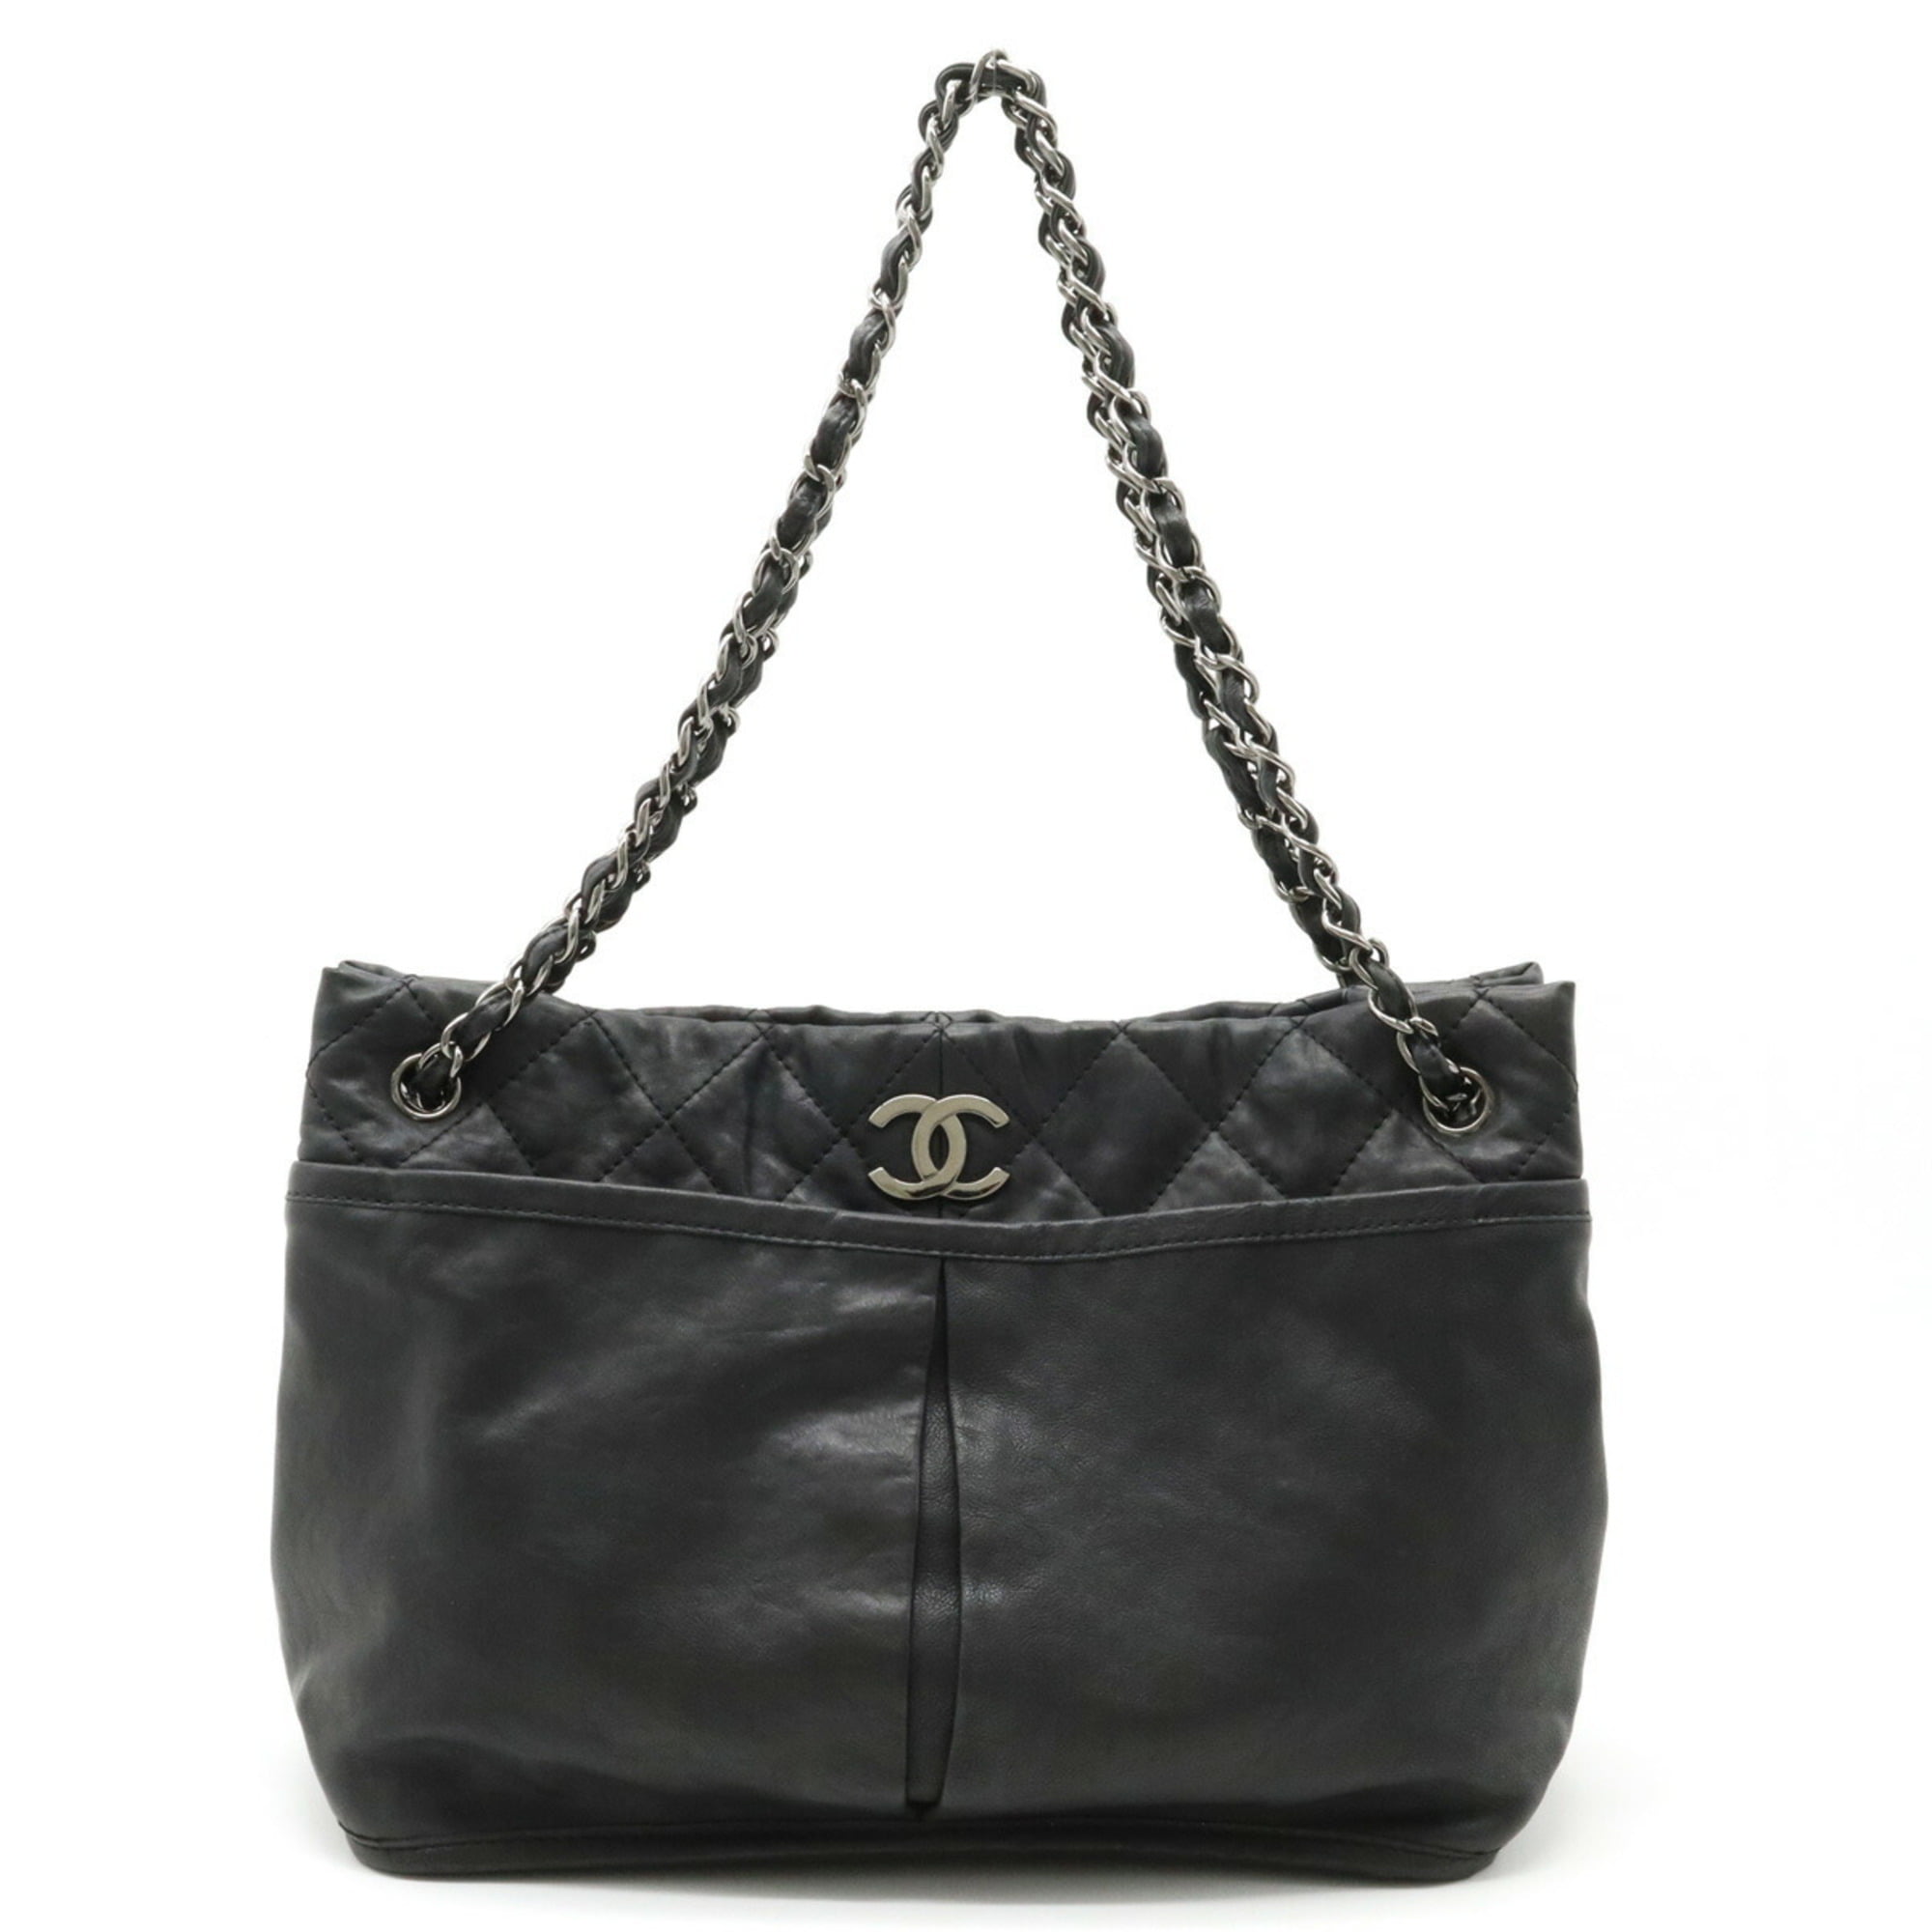 Authenticated Used CHANEL Chanel matelasse here mark chain shoulder tote  bag leather black